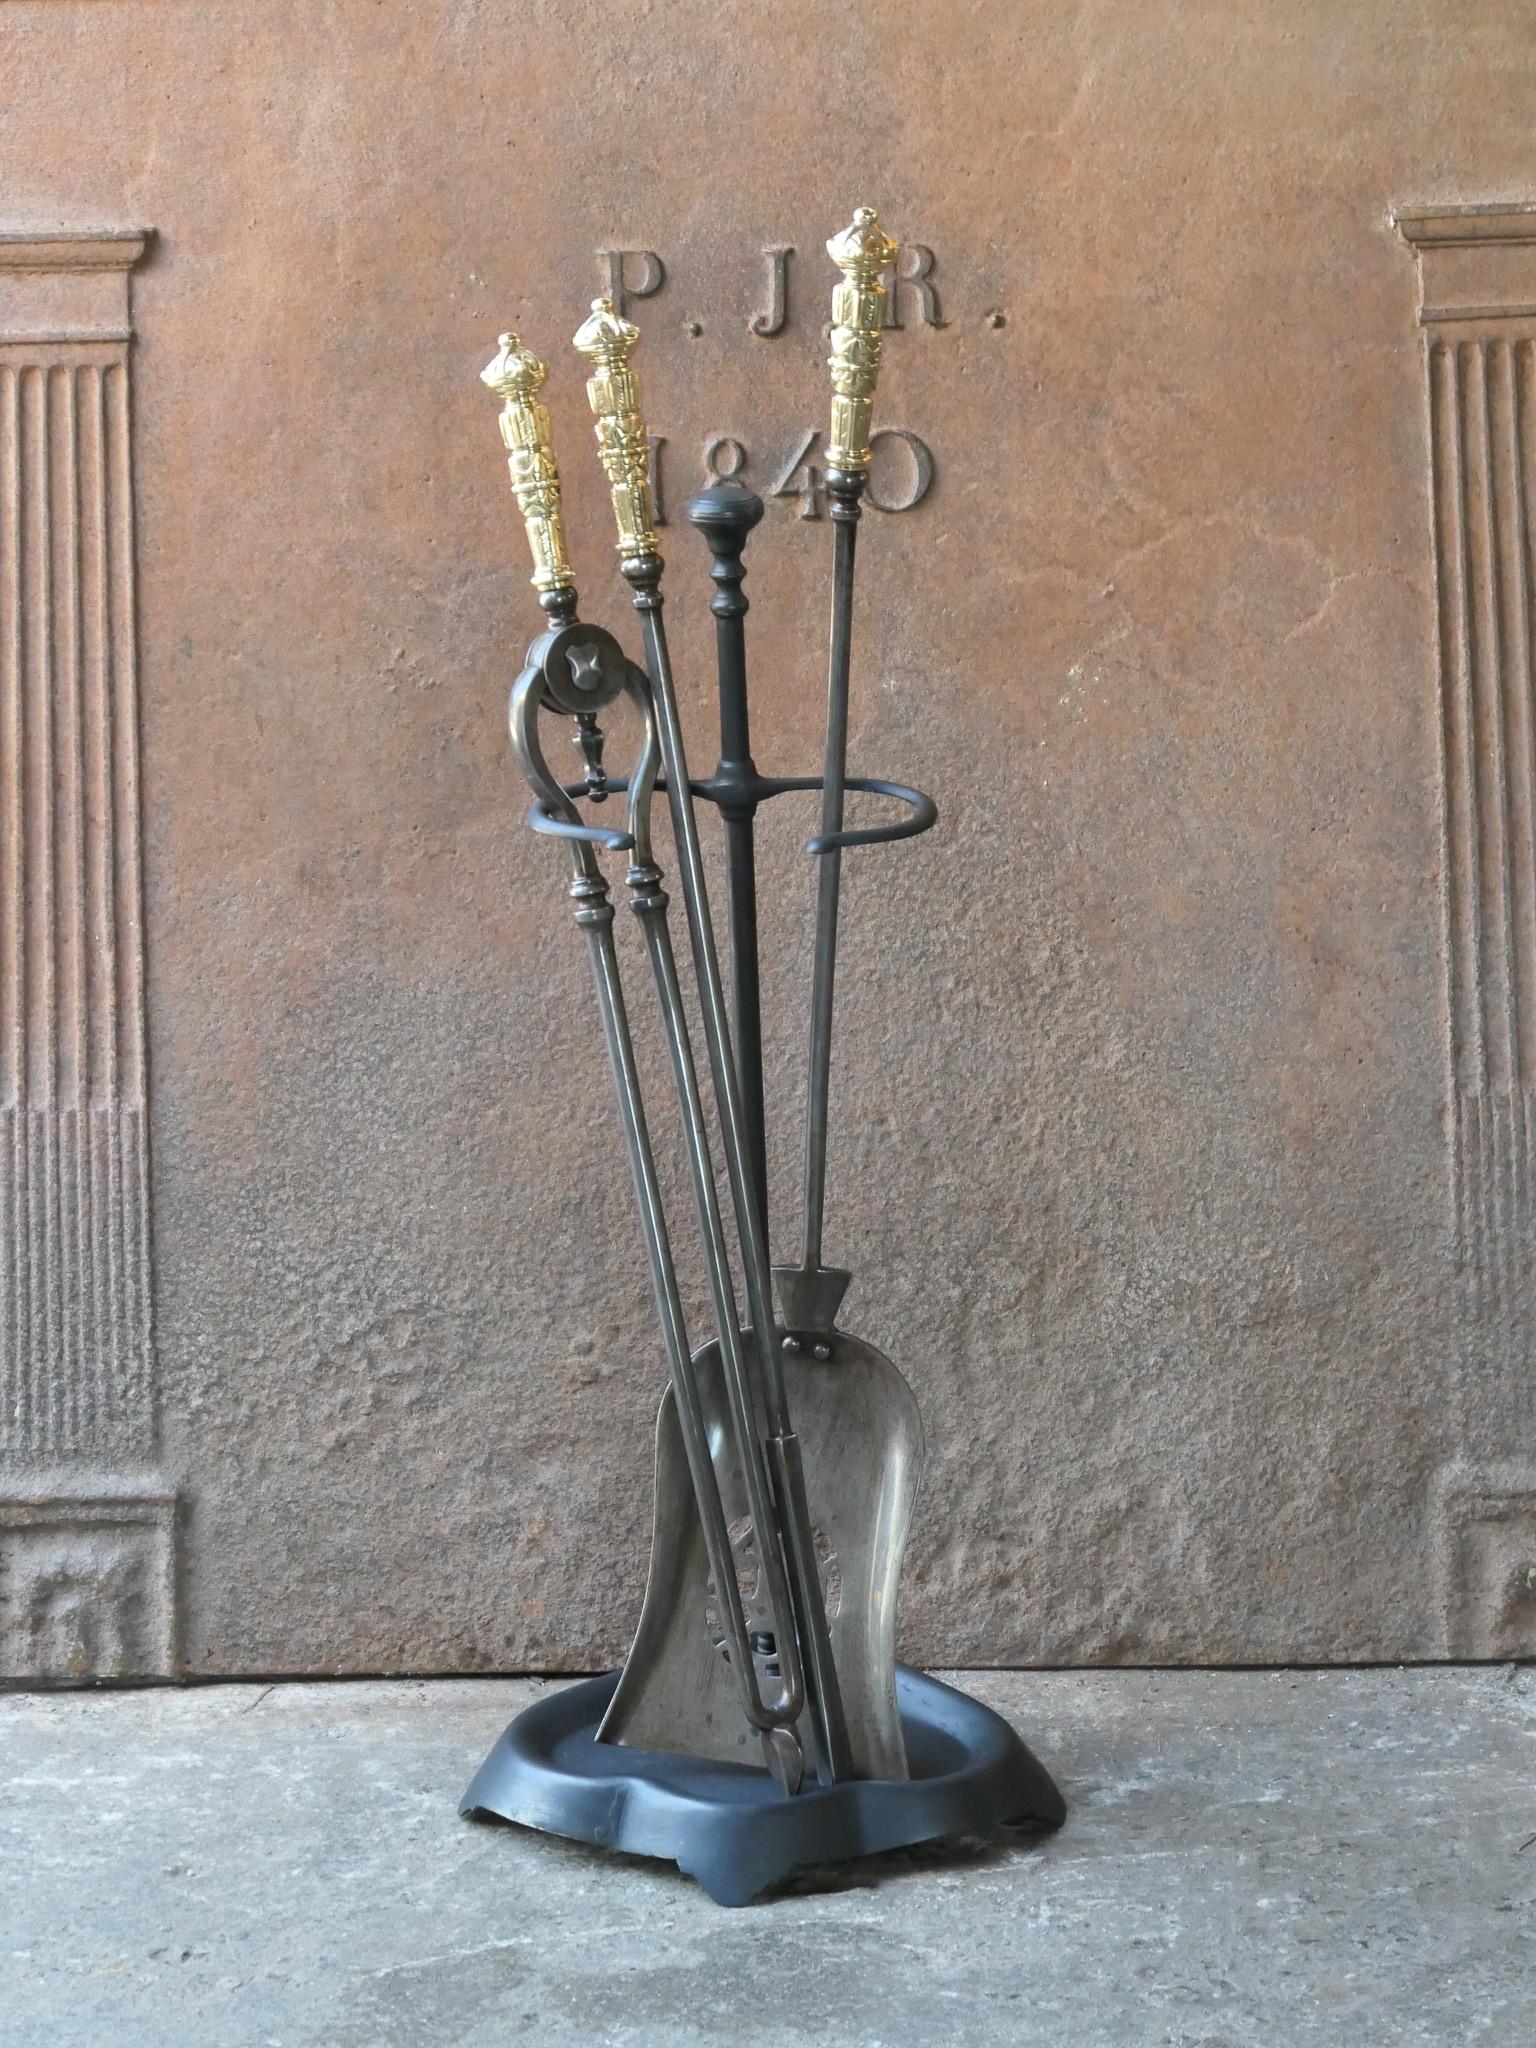 Beautiful 18th - 19th century English Georgian fireplace tool set. The tool set consists of tongs, shovel, poker and stand. The stand is made of wrought iron and the tools are made of wrought iron with polished brass handles. The set is in a good